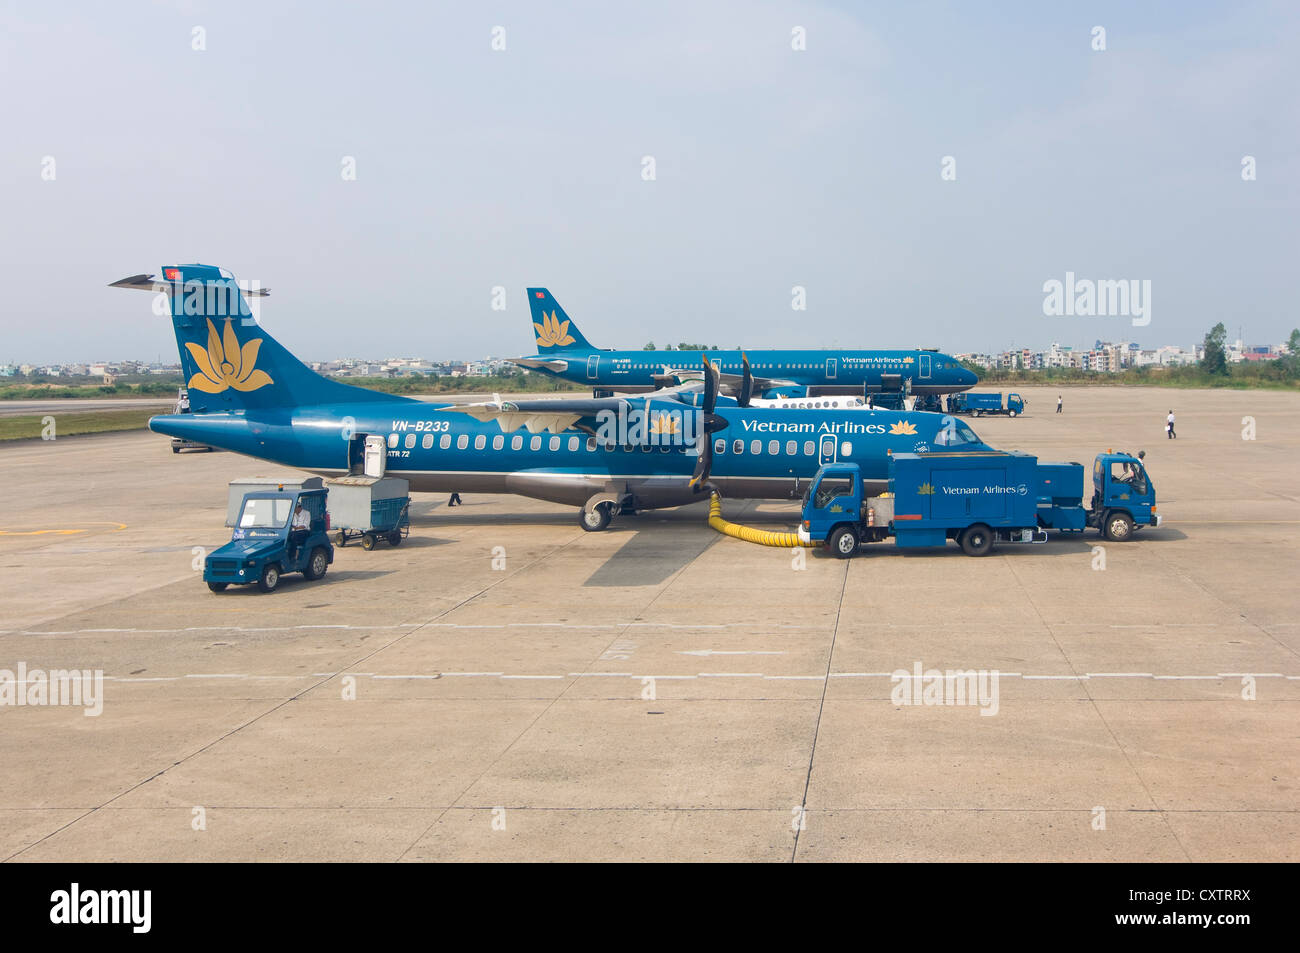 Horizontal view of two Vietnamese Airline planes, an ATR 72-212A twin propelled and an Airbus A320, refuelling at the airport. Stock Photo